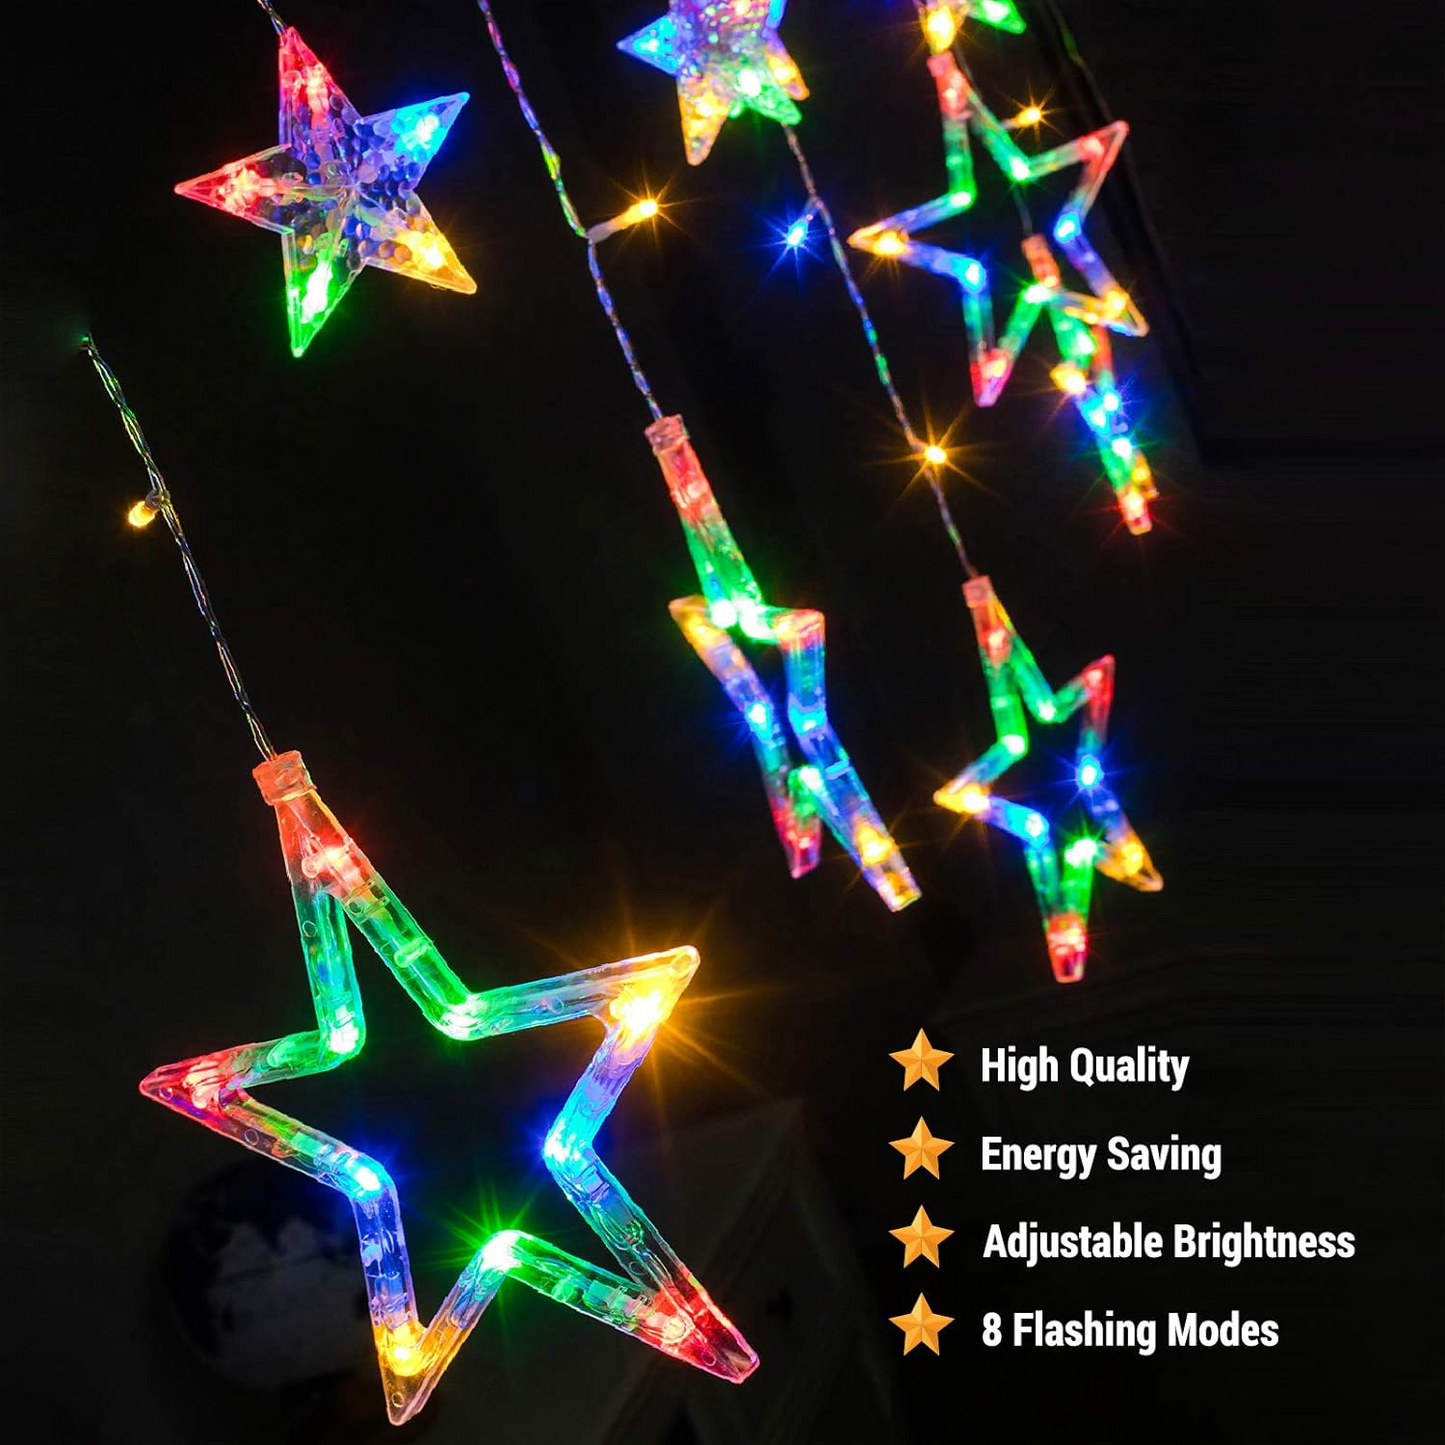 DazSpirit LED Star Curtain Lights with Remote Control 3.5m 138 LEDs 12 Star, Christmas Star Window Light Indoor and Outdoor